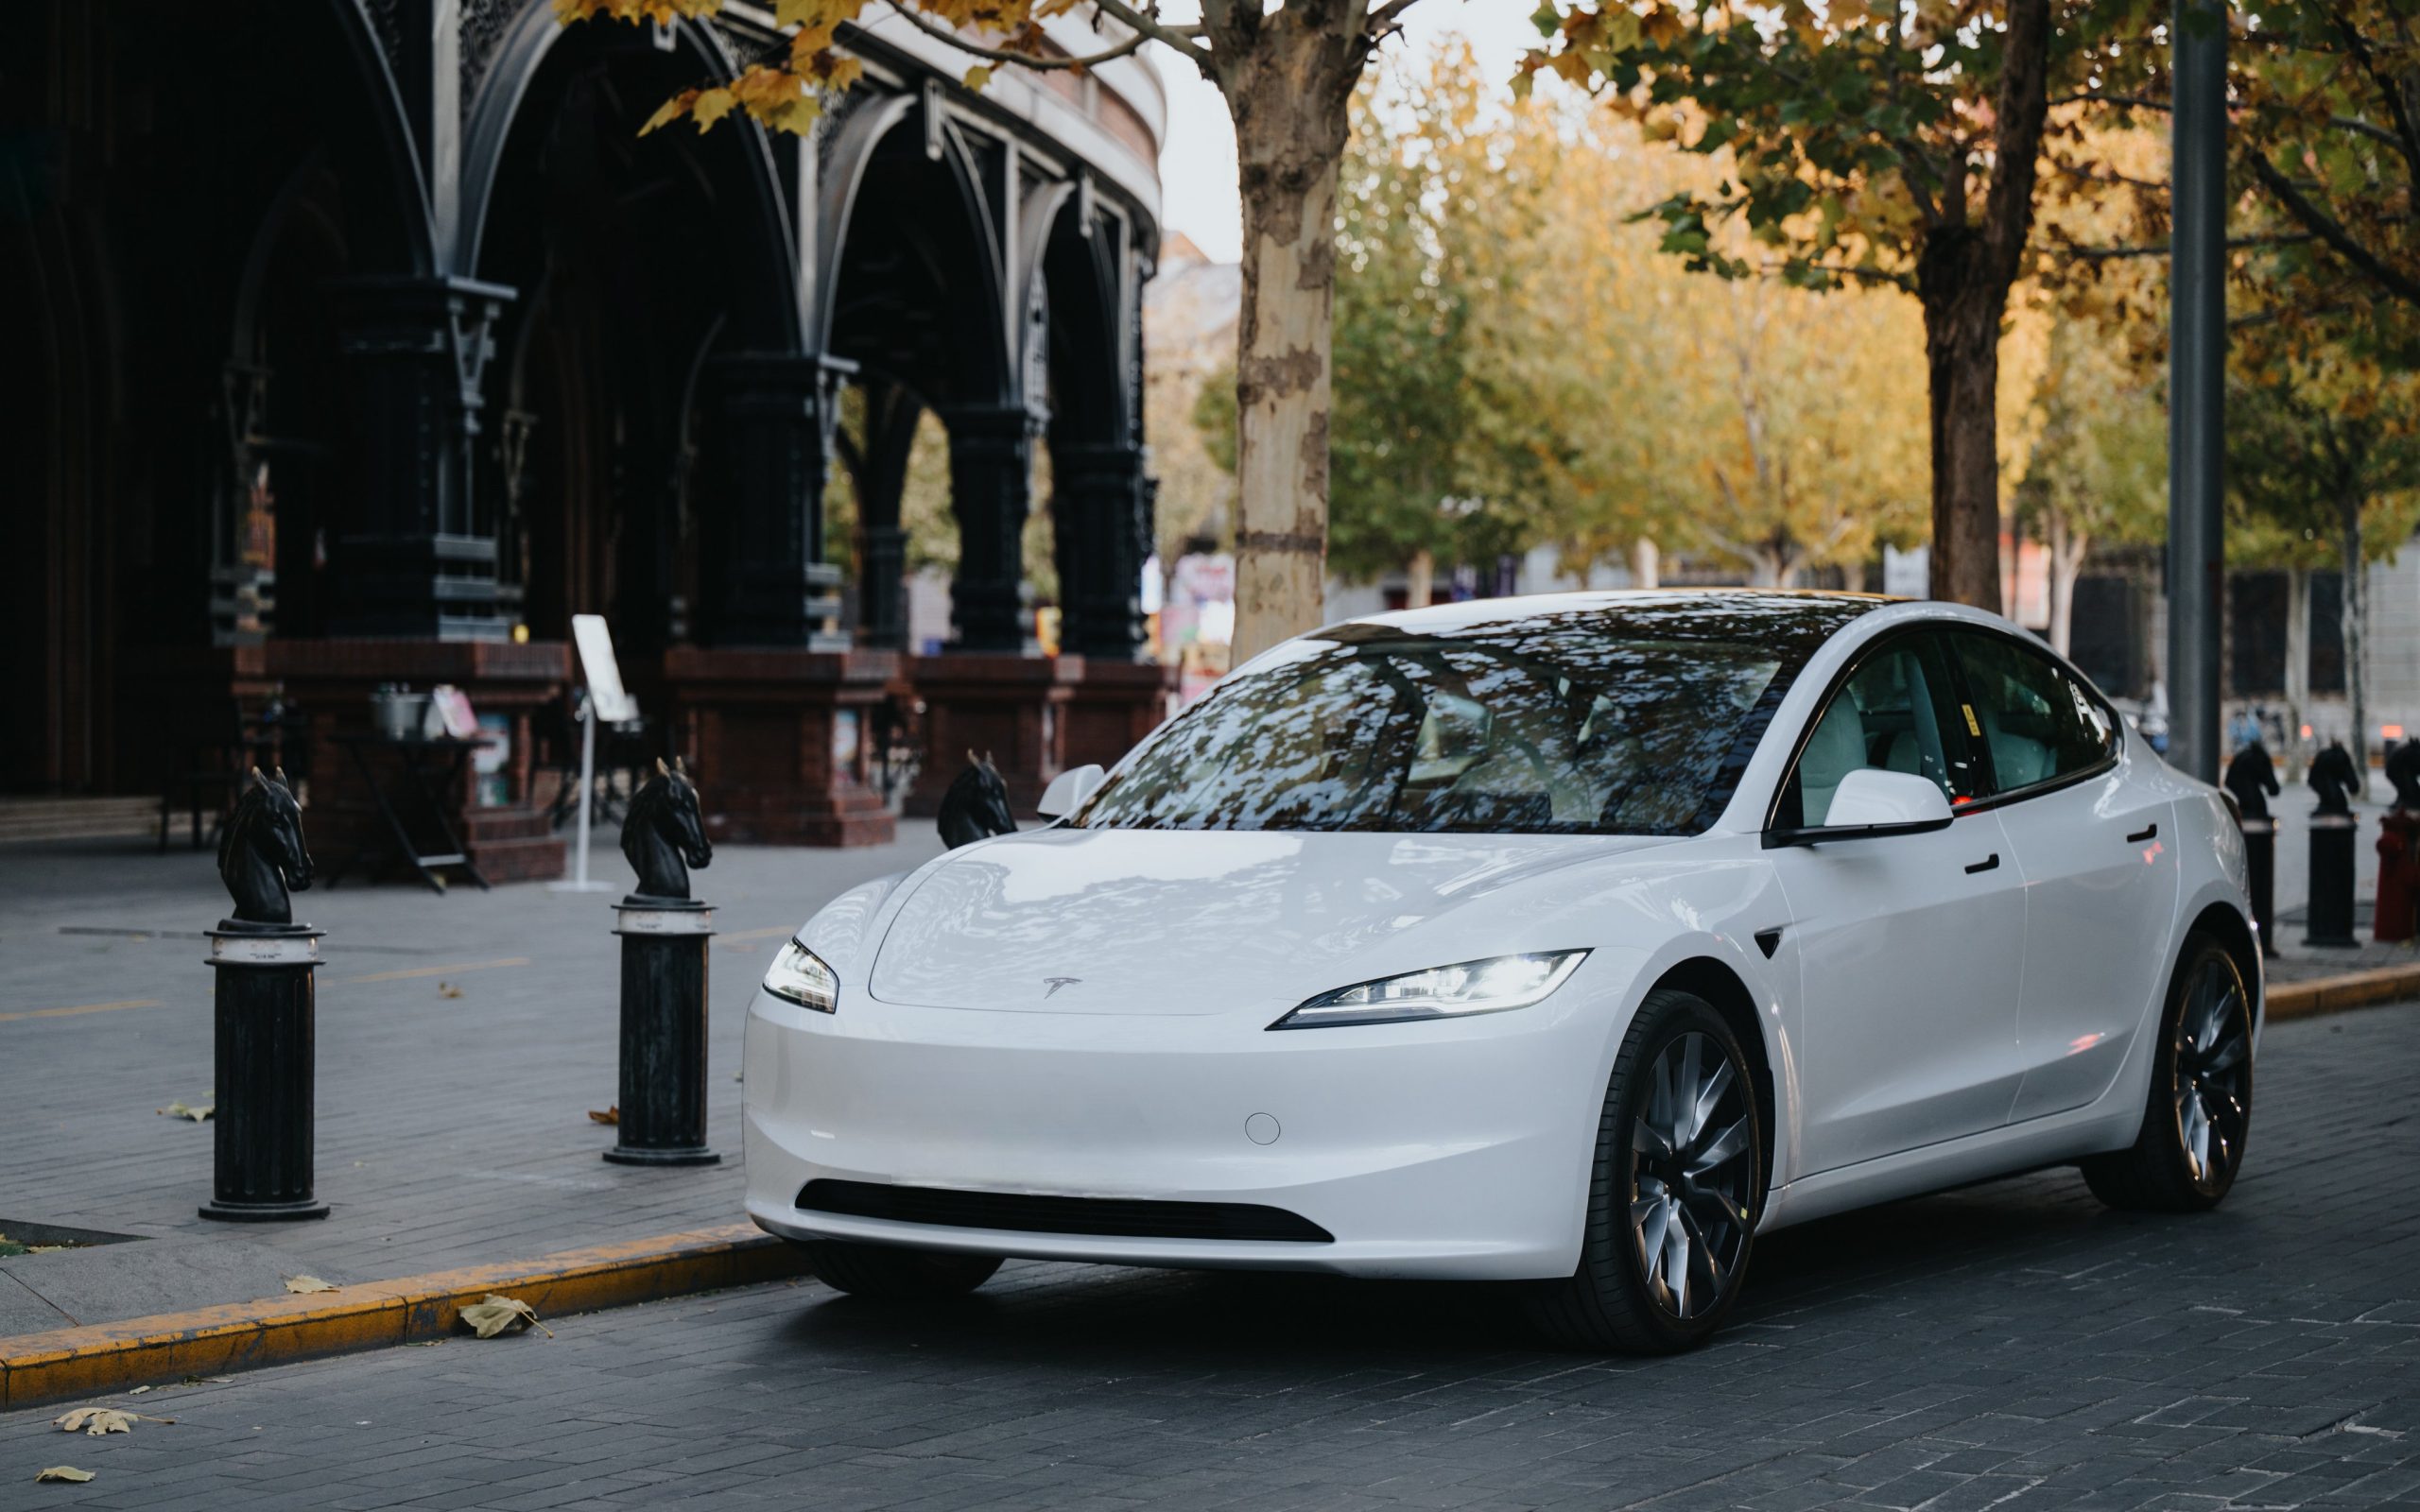 Tesla tops the UK’s most popular EV list 5 years in a row